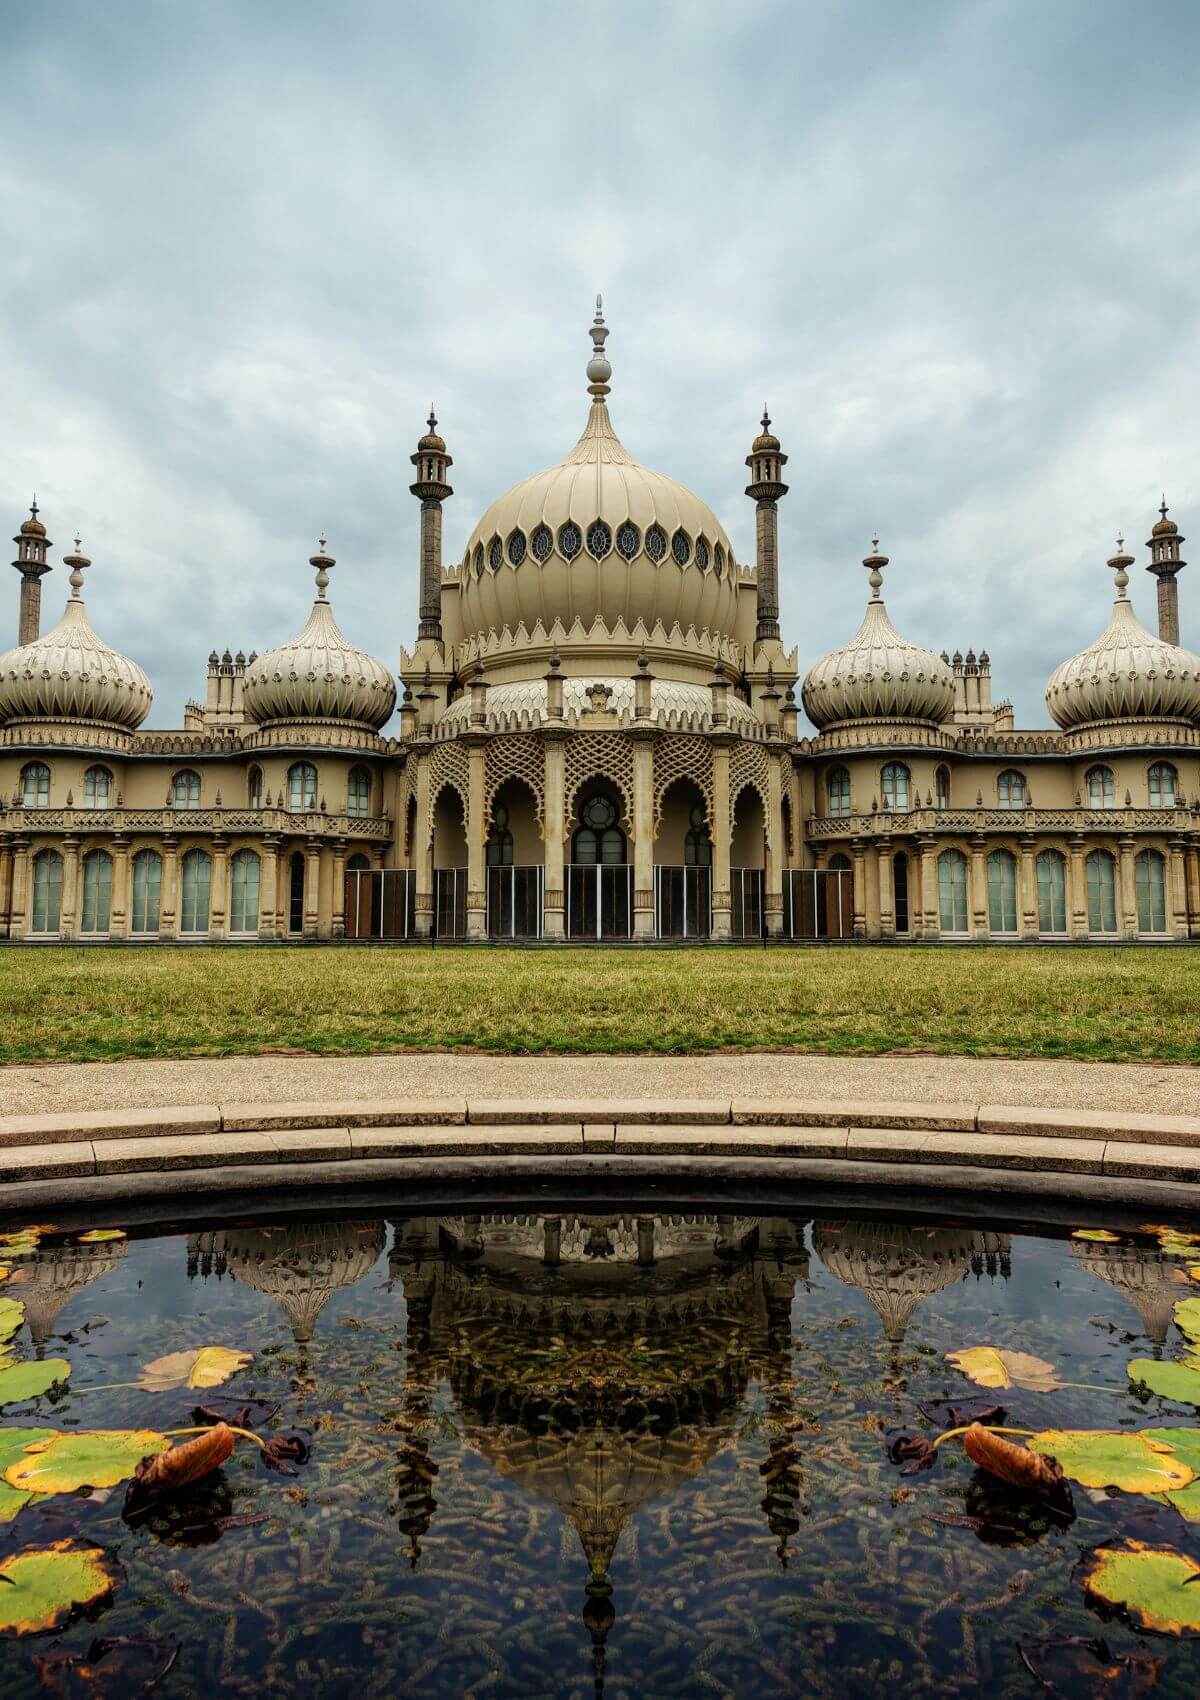 The Royal Pavillion in England